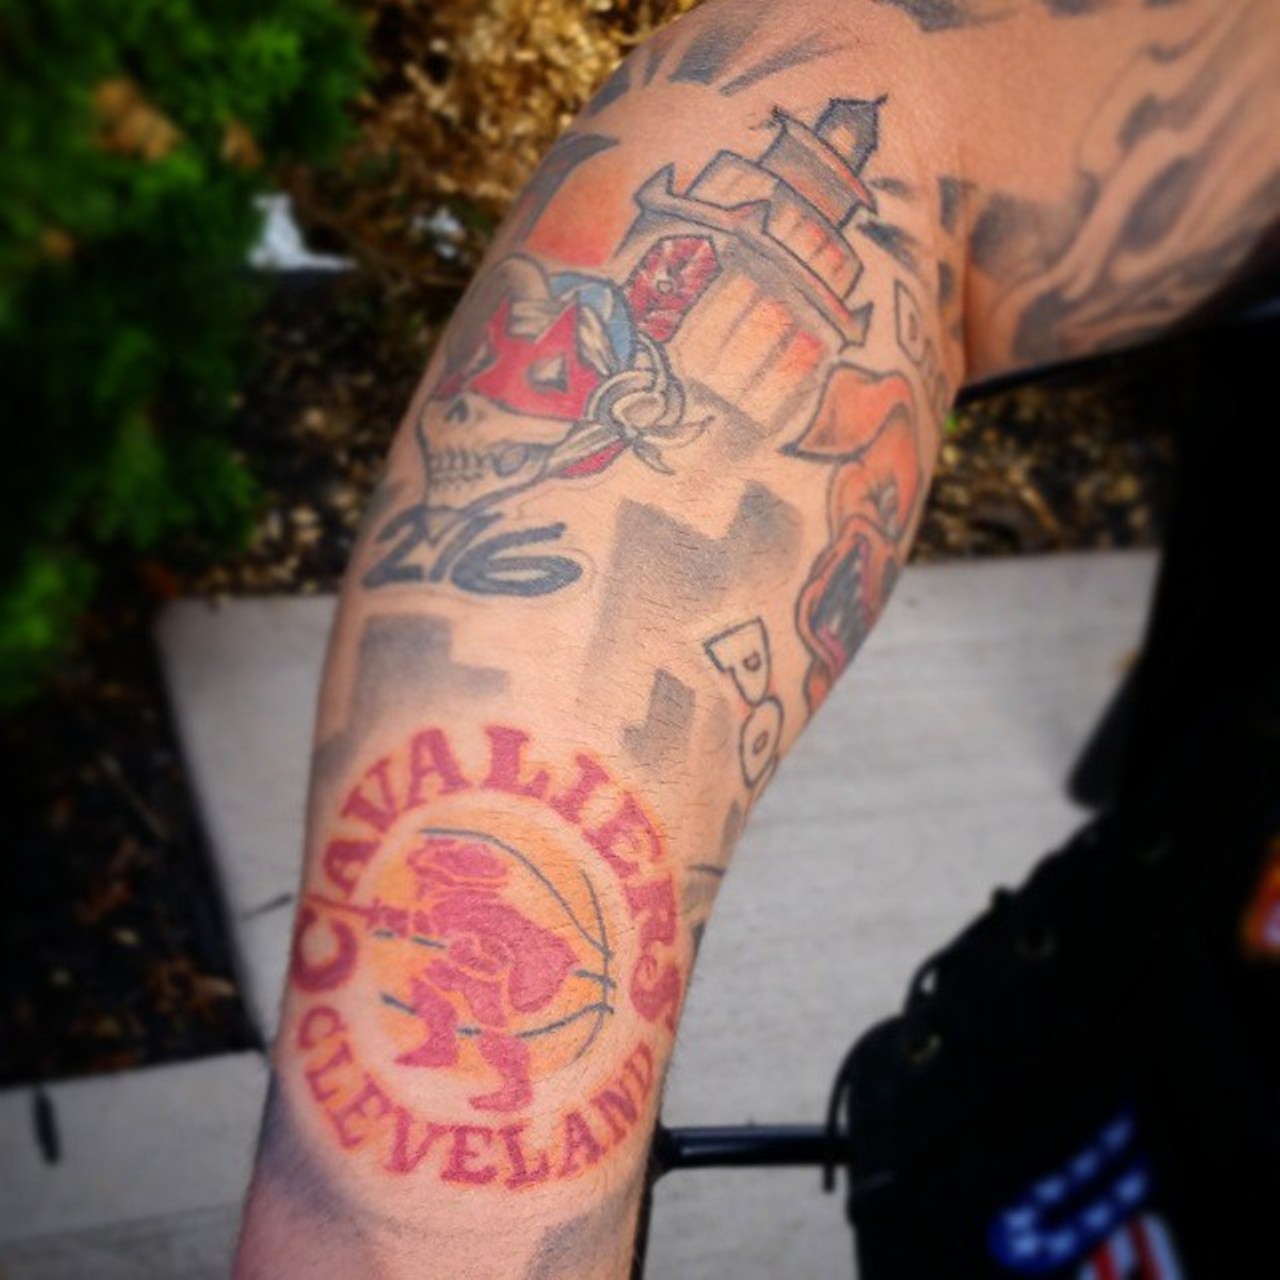 D-Backs gave away tattoo sleeves in honor of 'Tatman' Ryan Roberts  (Pictures)